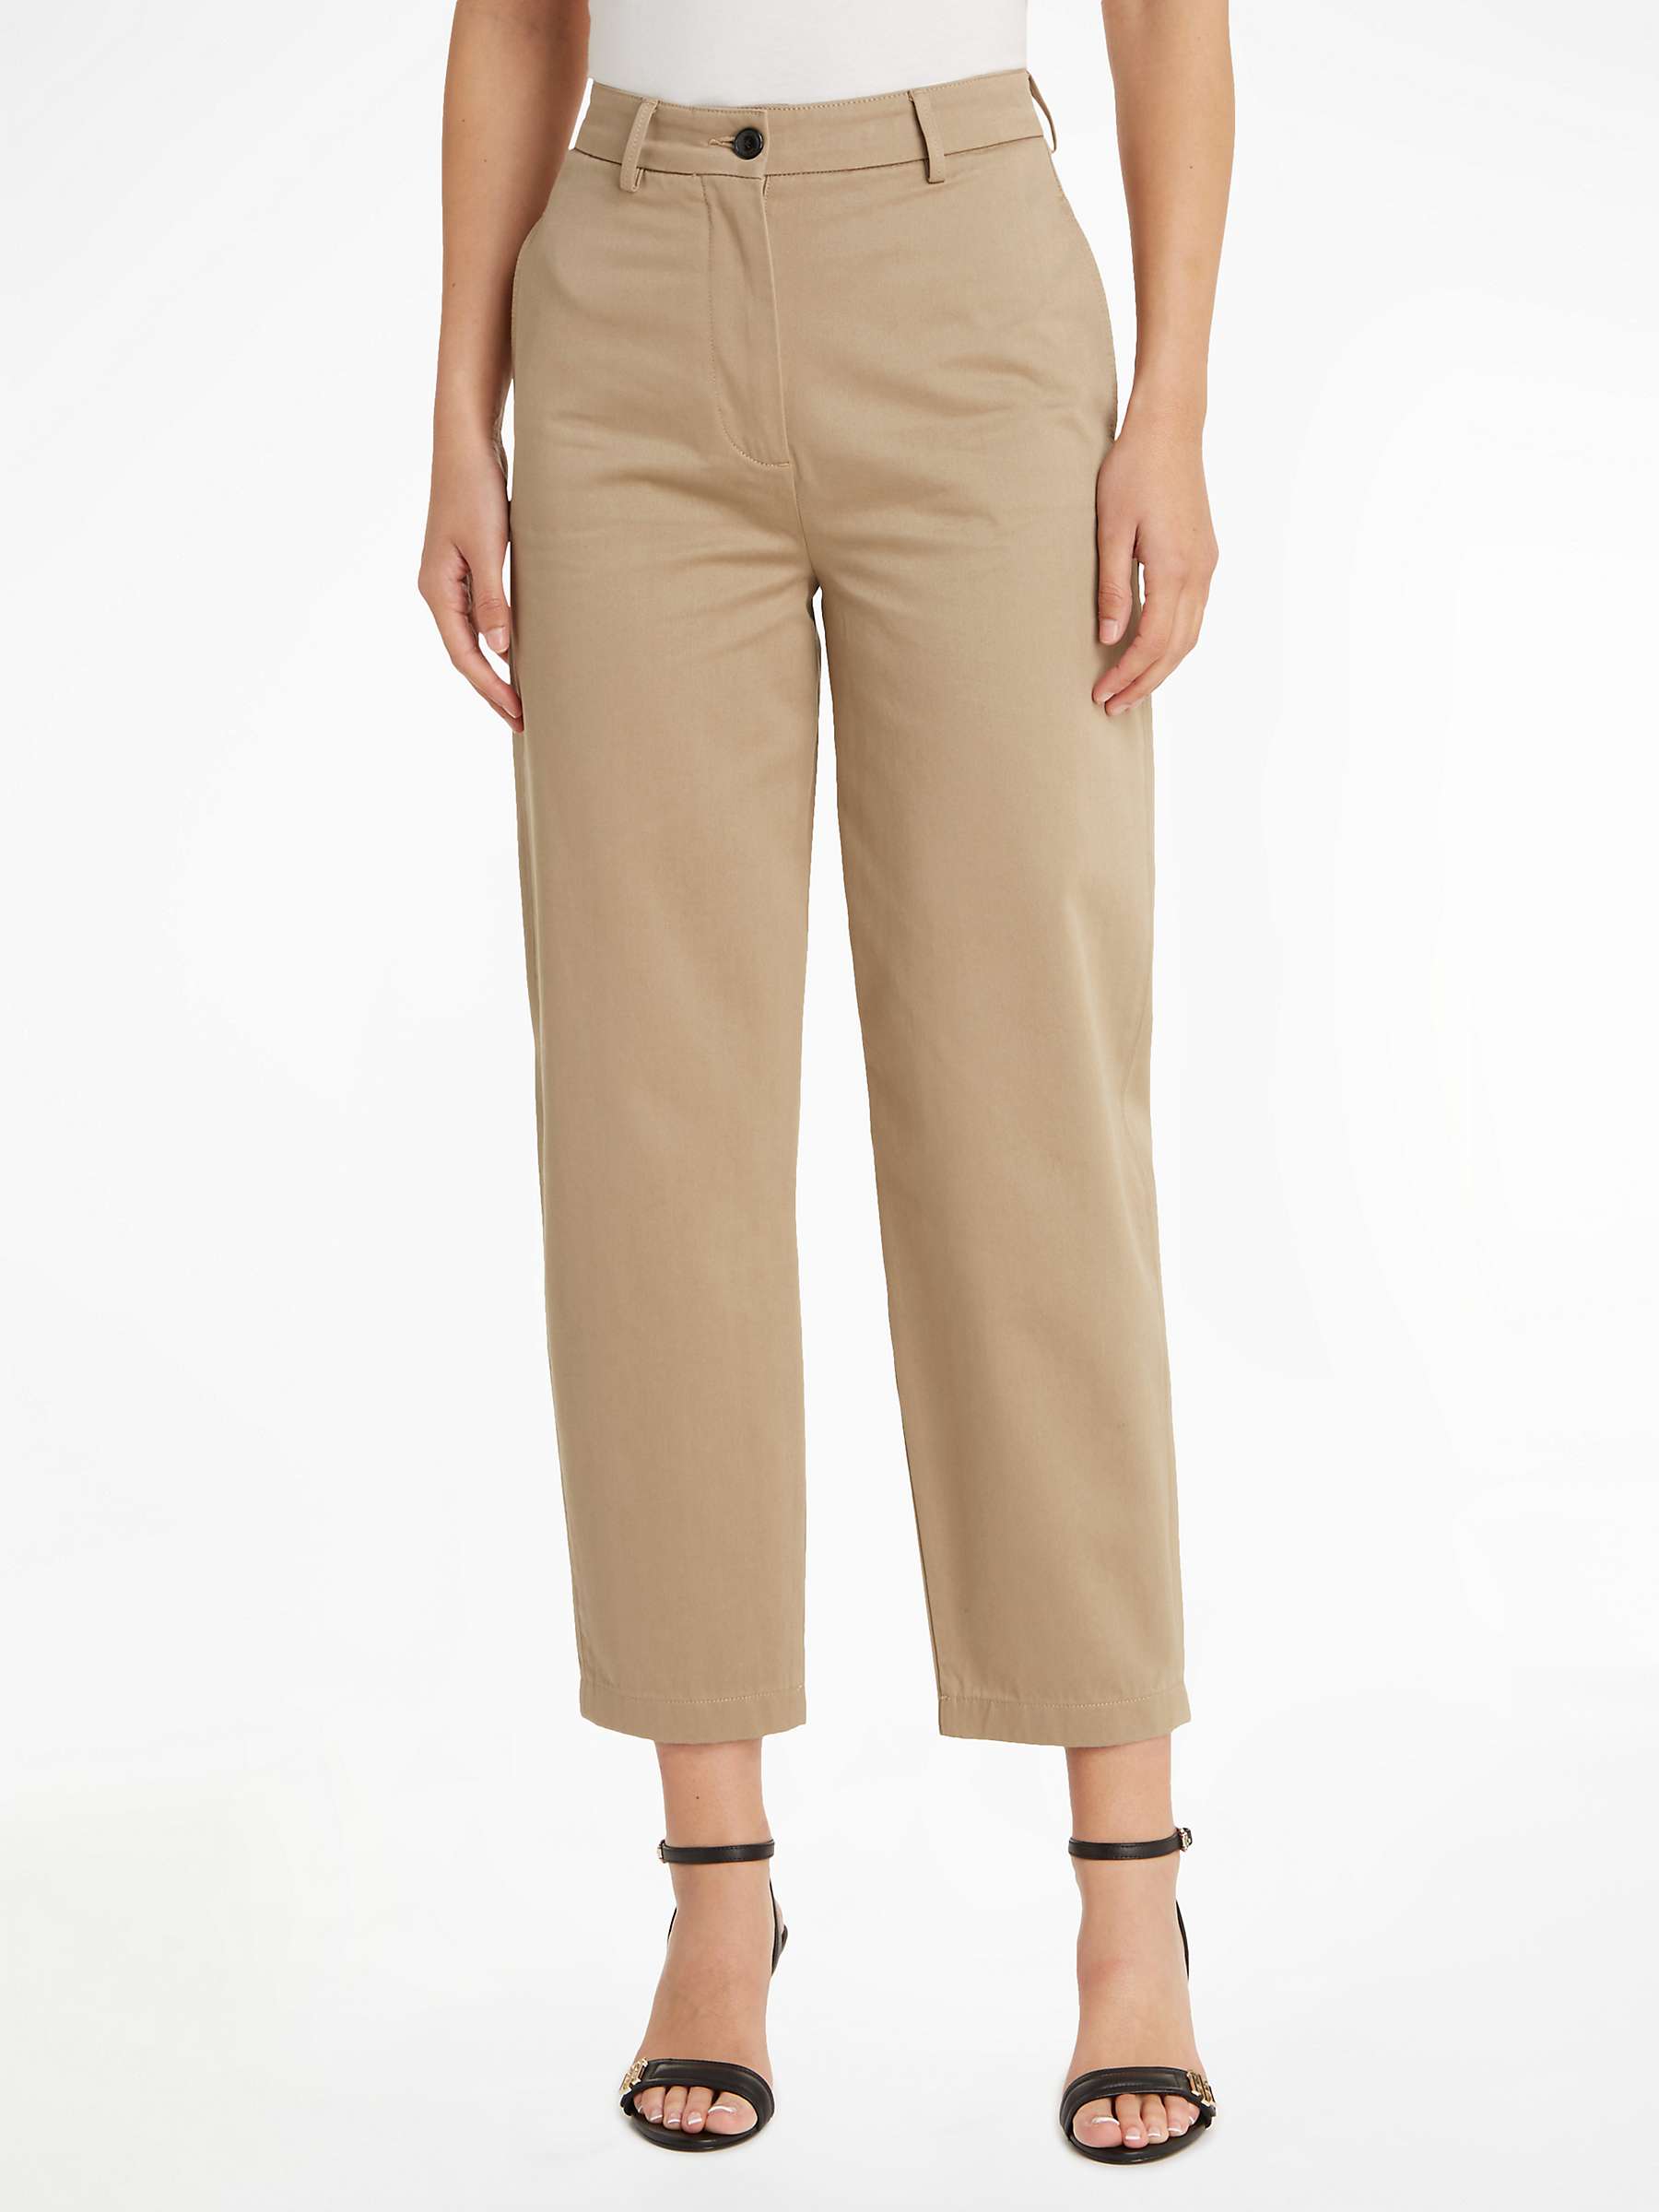 Buy Tommy Hilfiger Casual Chino Organic Cotton Trousers, Beige Online at johnlewis.com